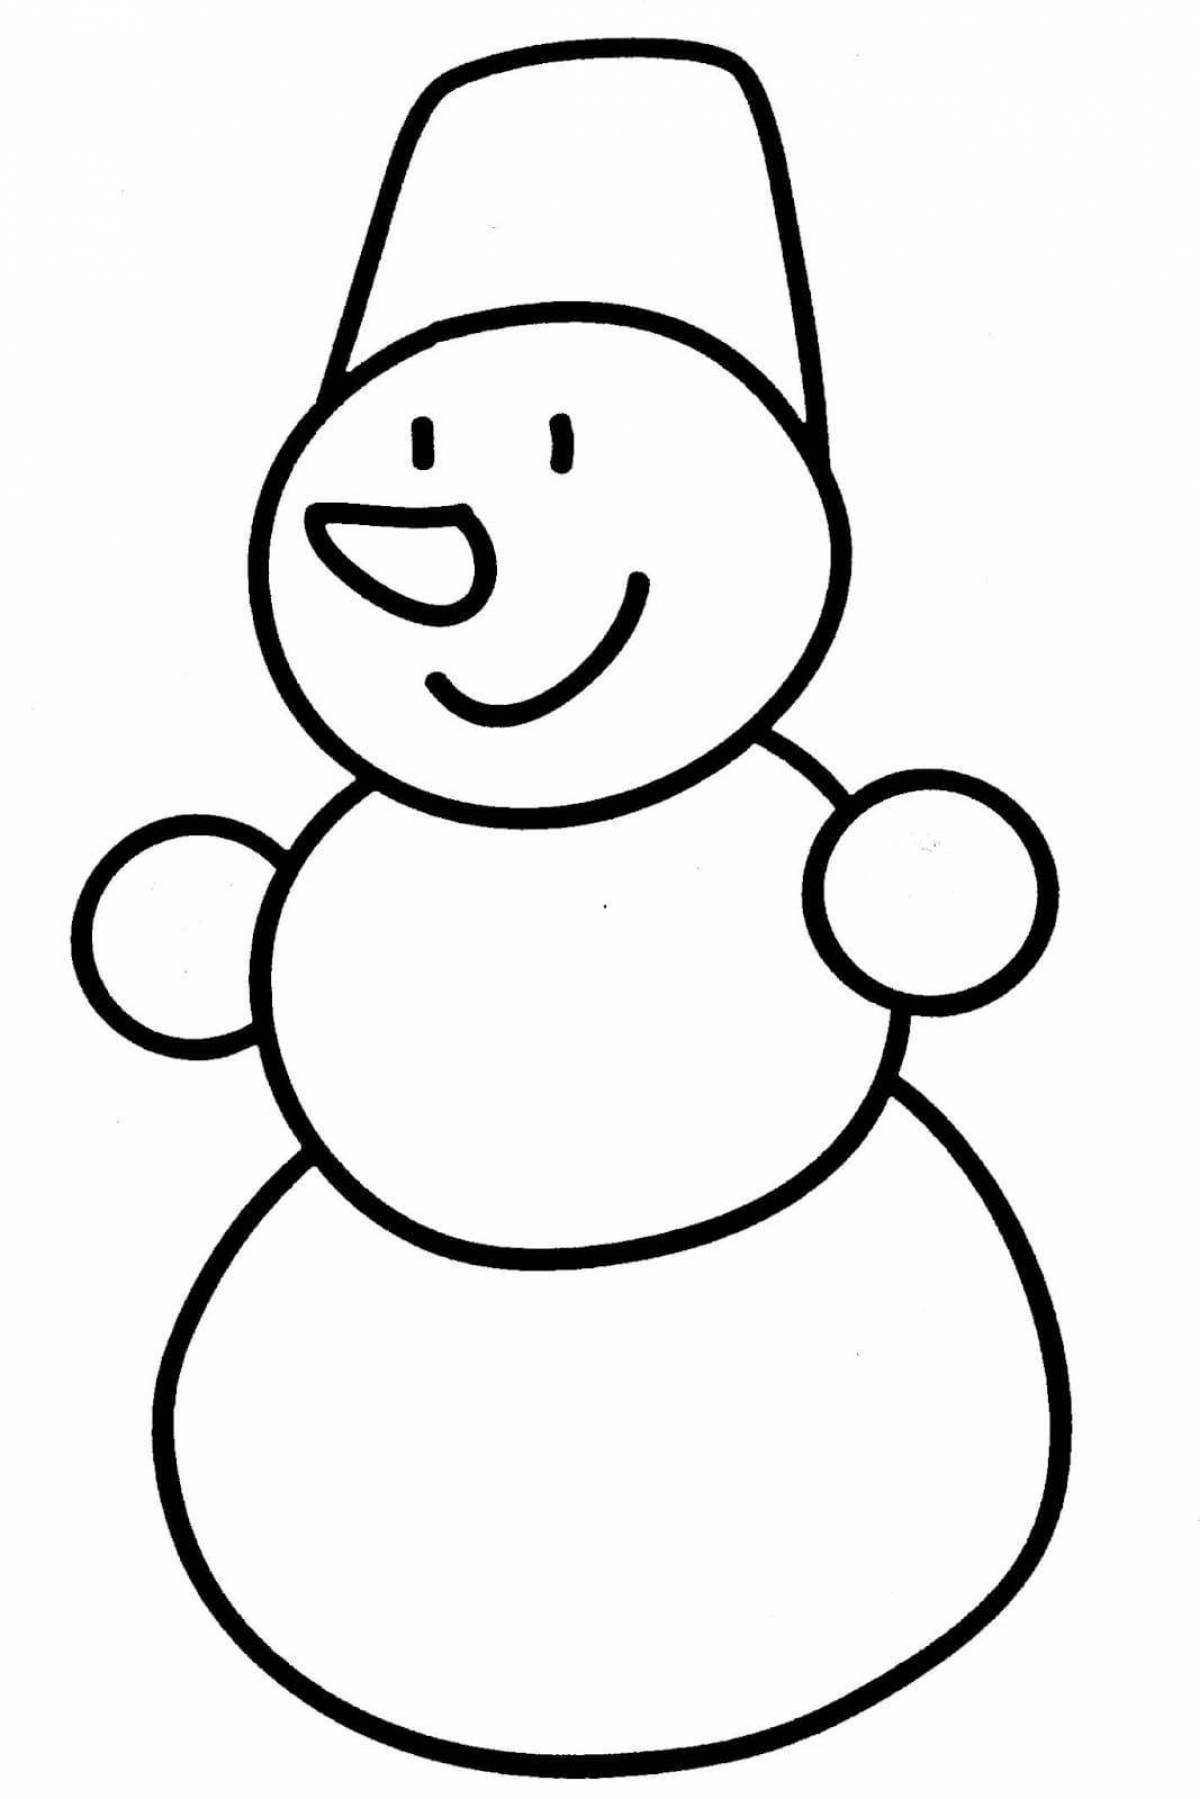 Fabulous coloring book snowman for children 4-5 years old